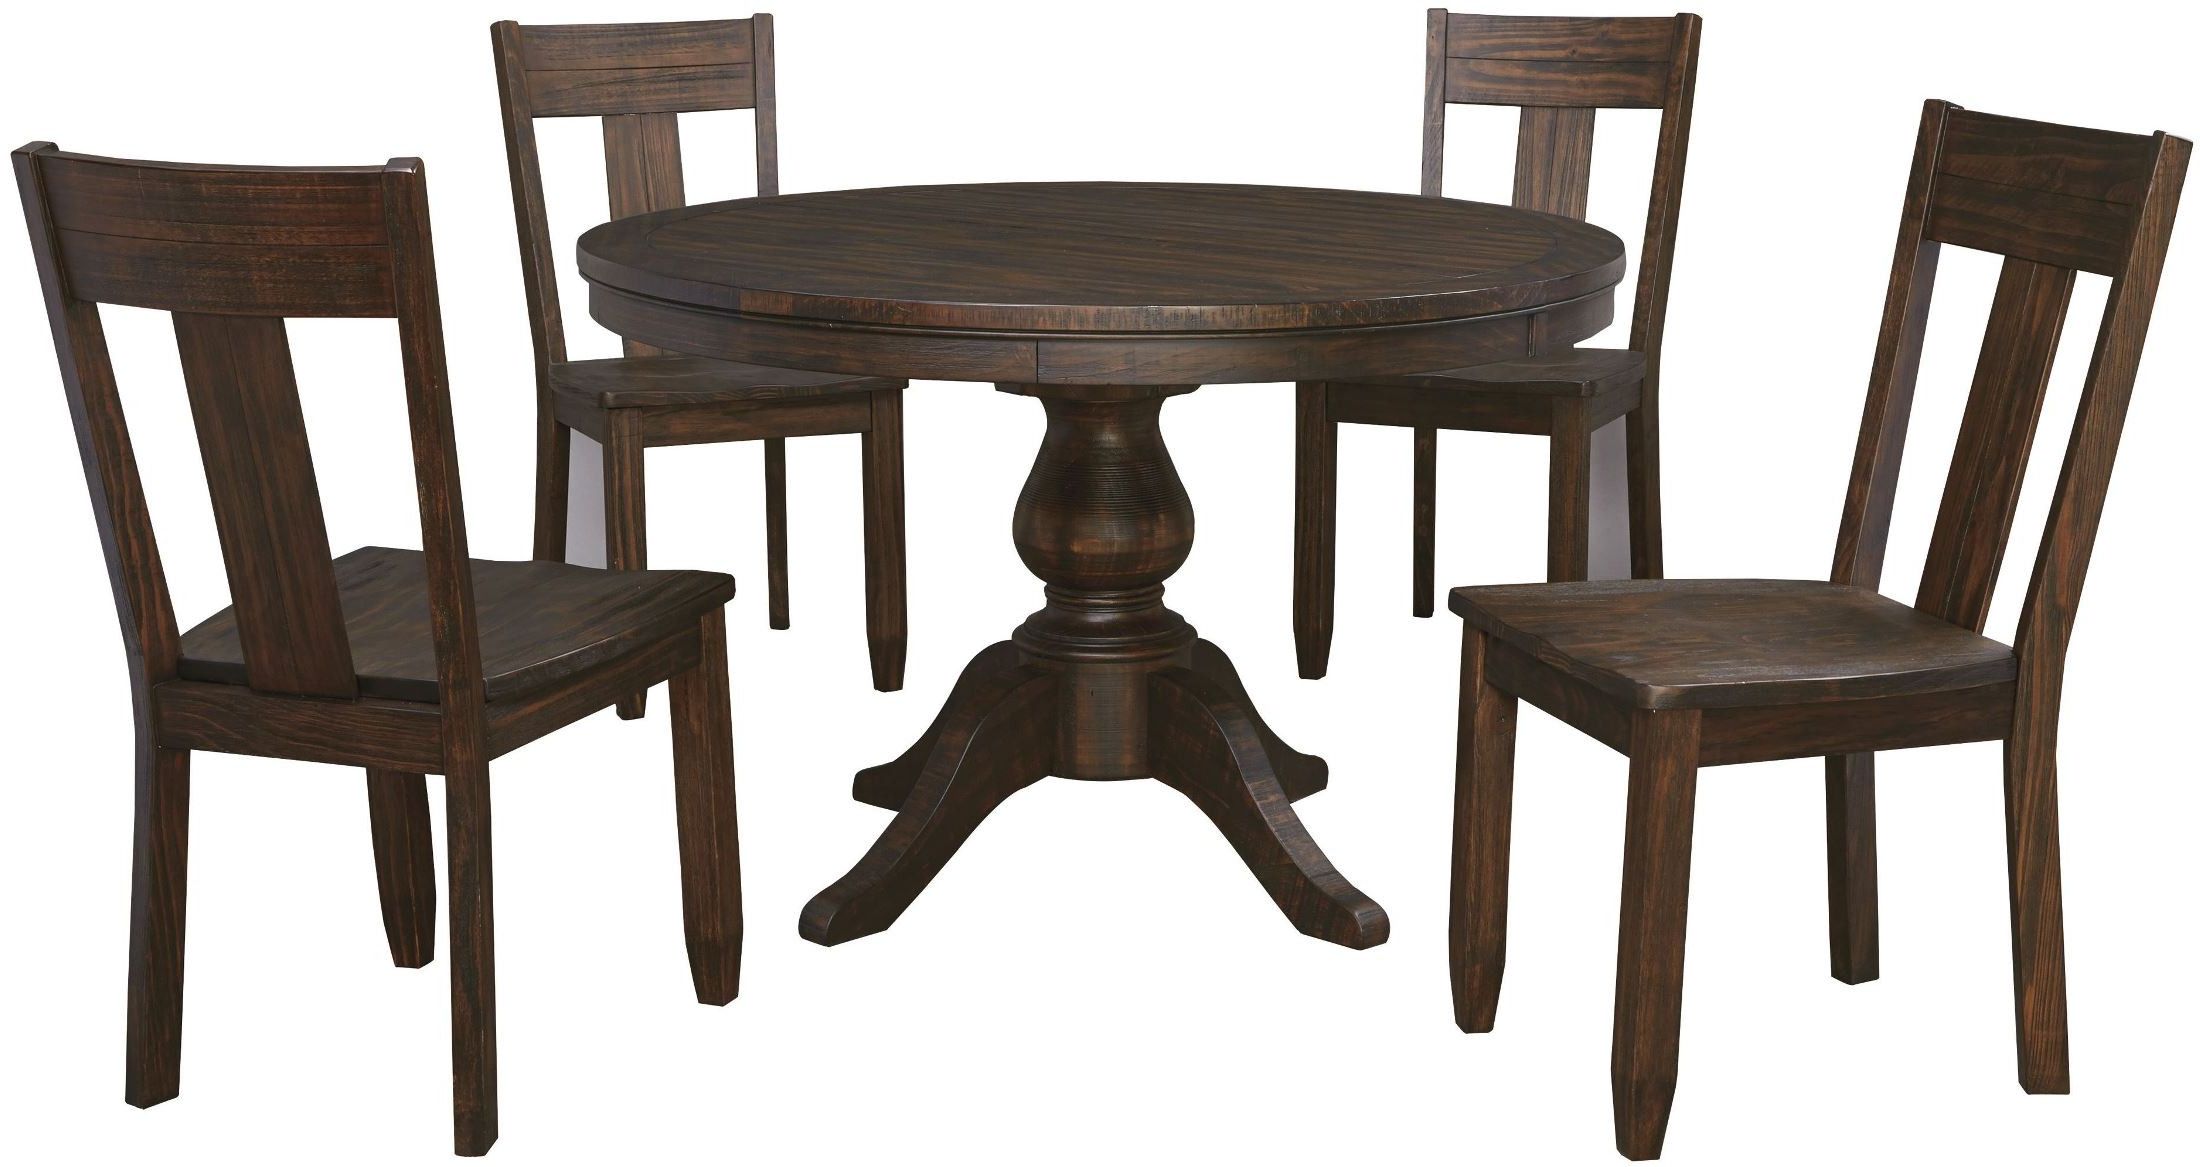 Fashionable Dark Brown Round Dining Tables In Trudell Dark Brown Round Extendable Pedestal Dining Room (View 7 of 20)